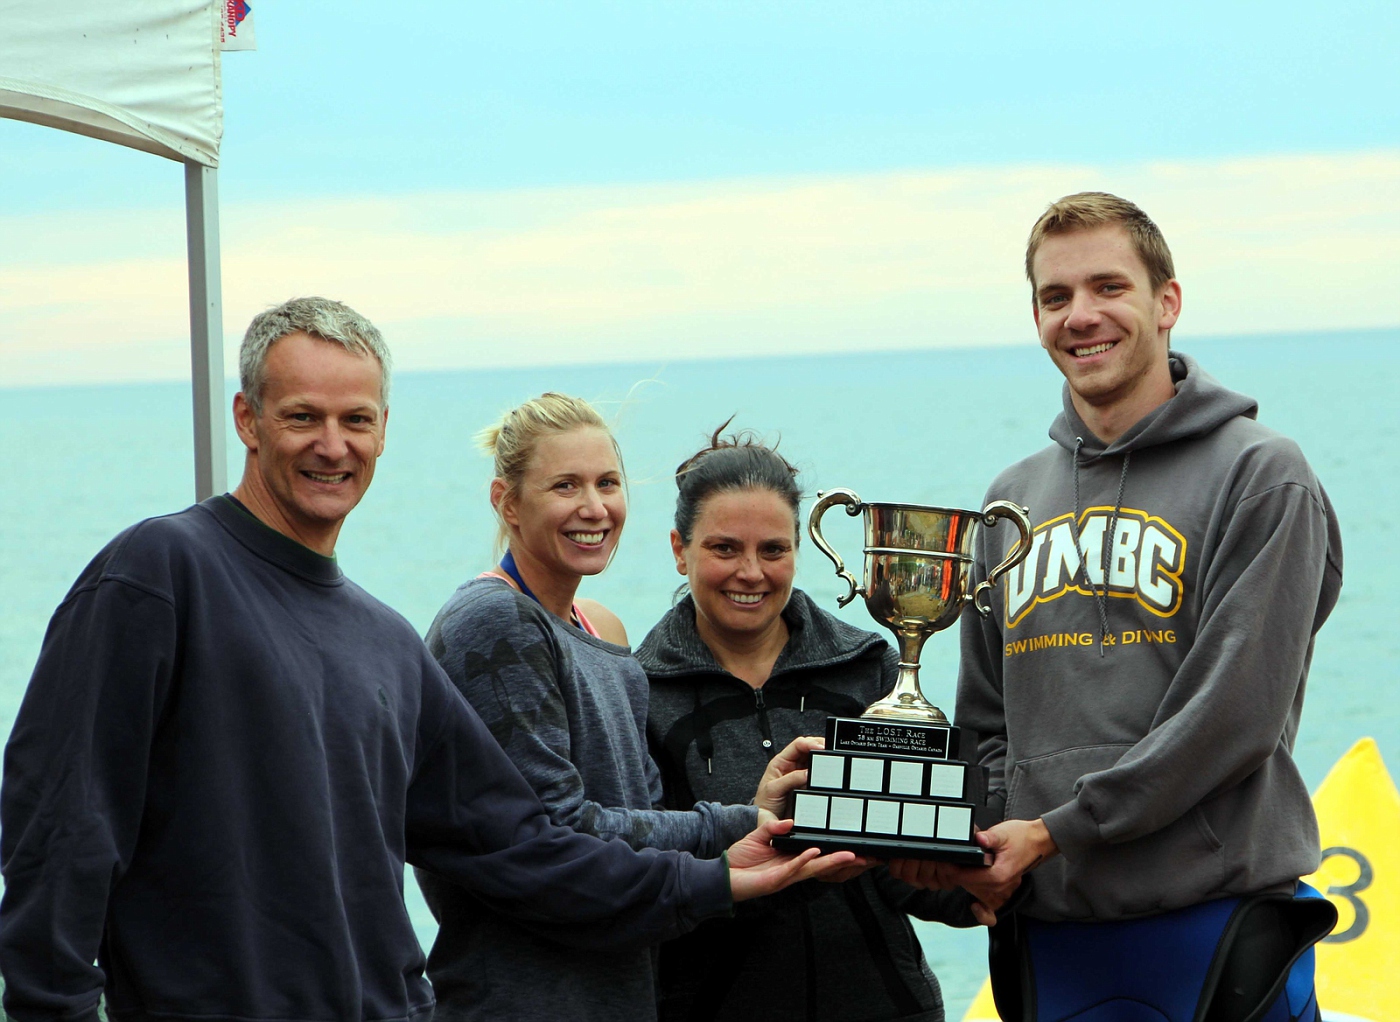 Winners of the 500m: Mens Naked: Charles Bolduc, Womens Naked: Kristen Sanhueza, Womens Wetsuit: Lisa Pickering, Mens Wetsuit and first overall: Dylan Kent